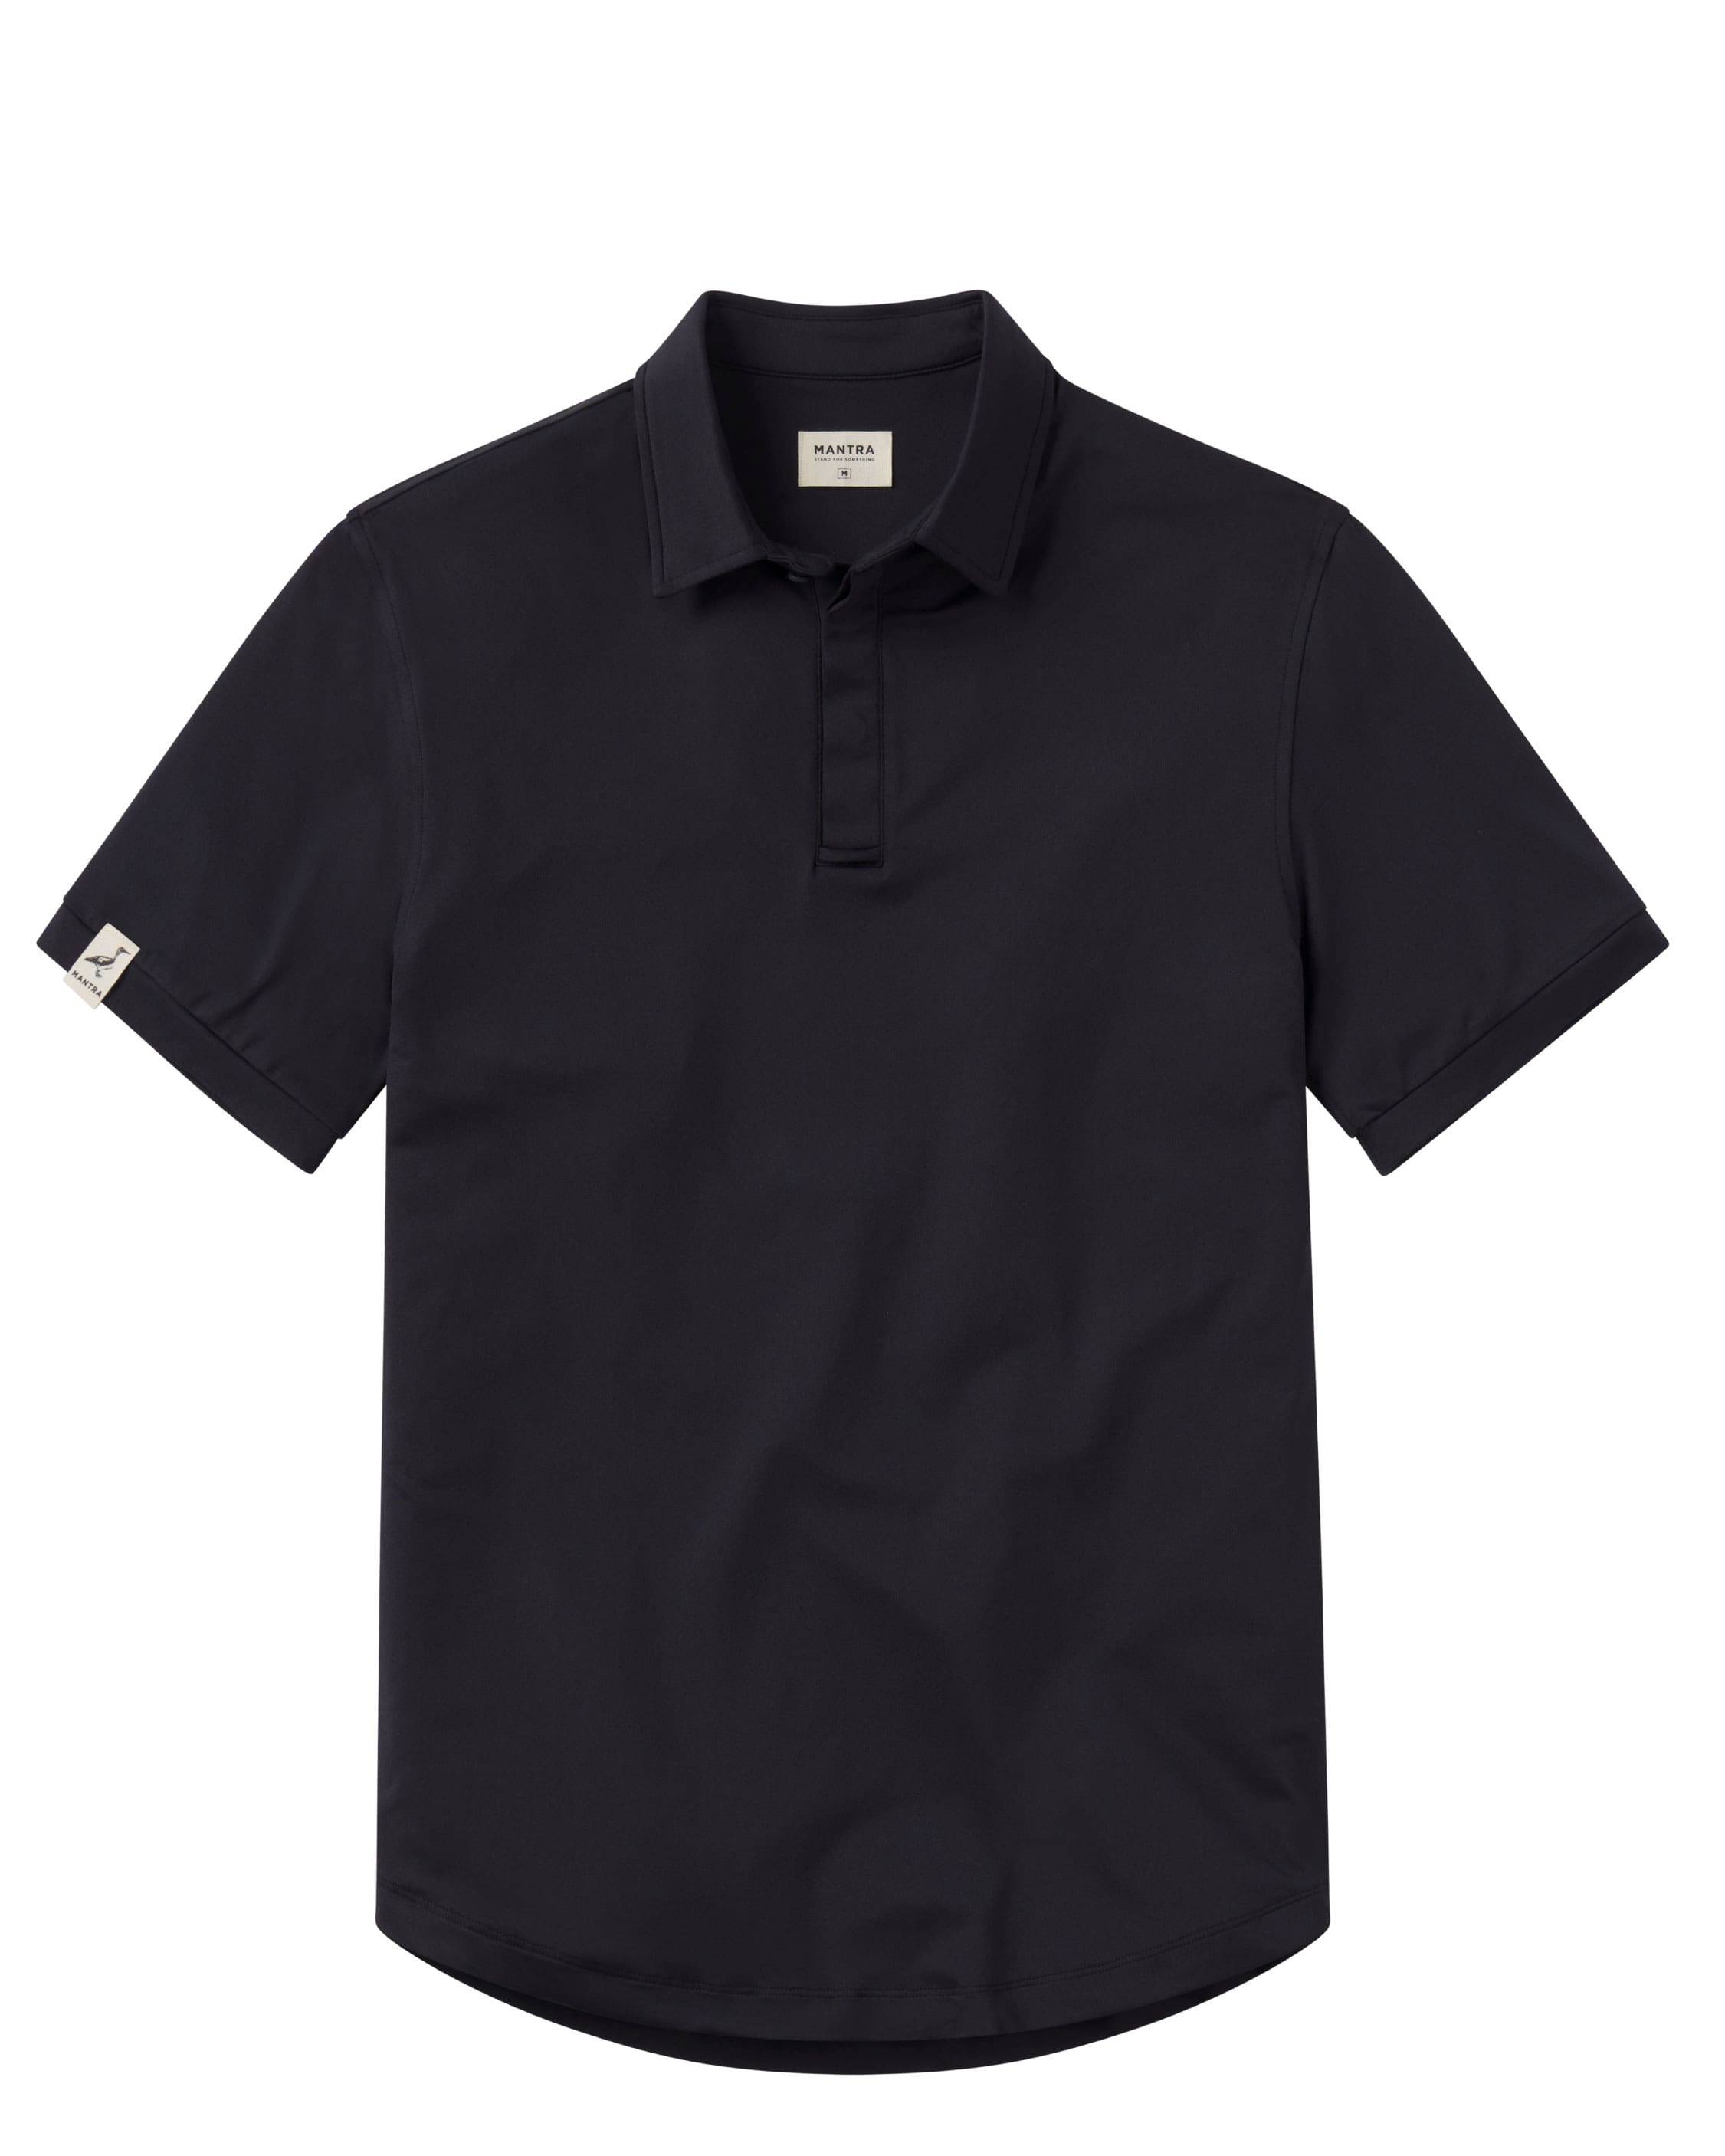 CATALYST POLO - POINT COLLAR - BLACK SANDS color selector